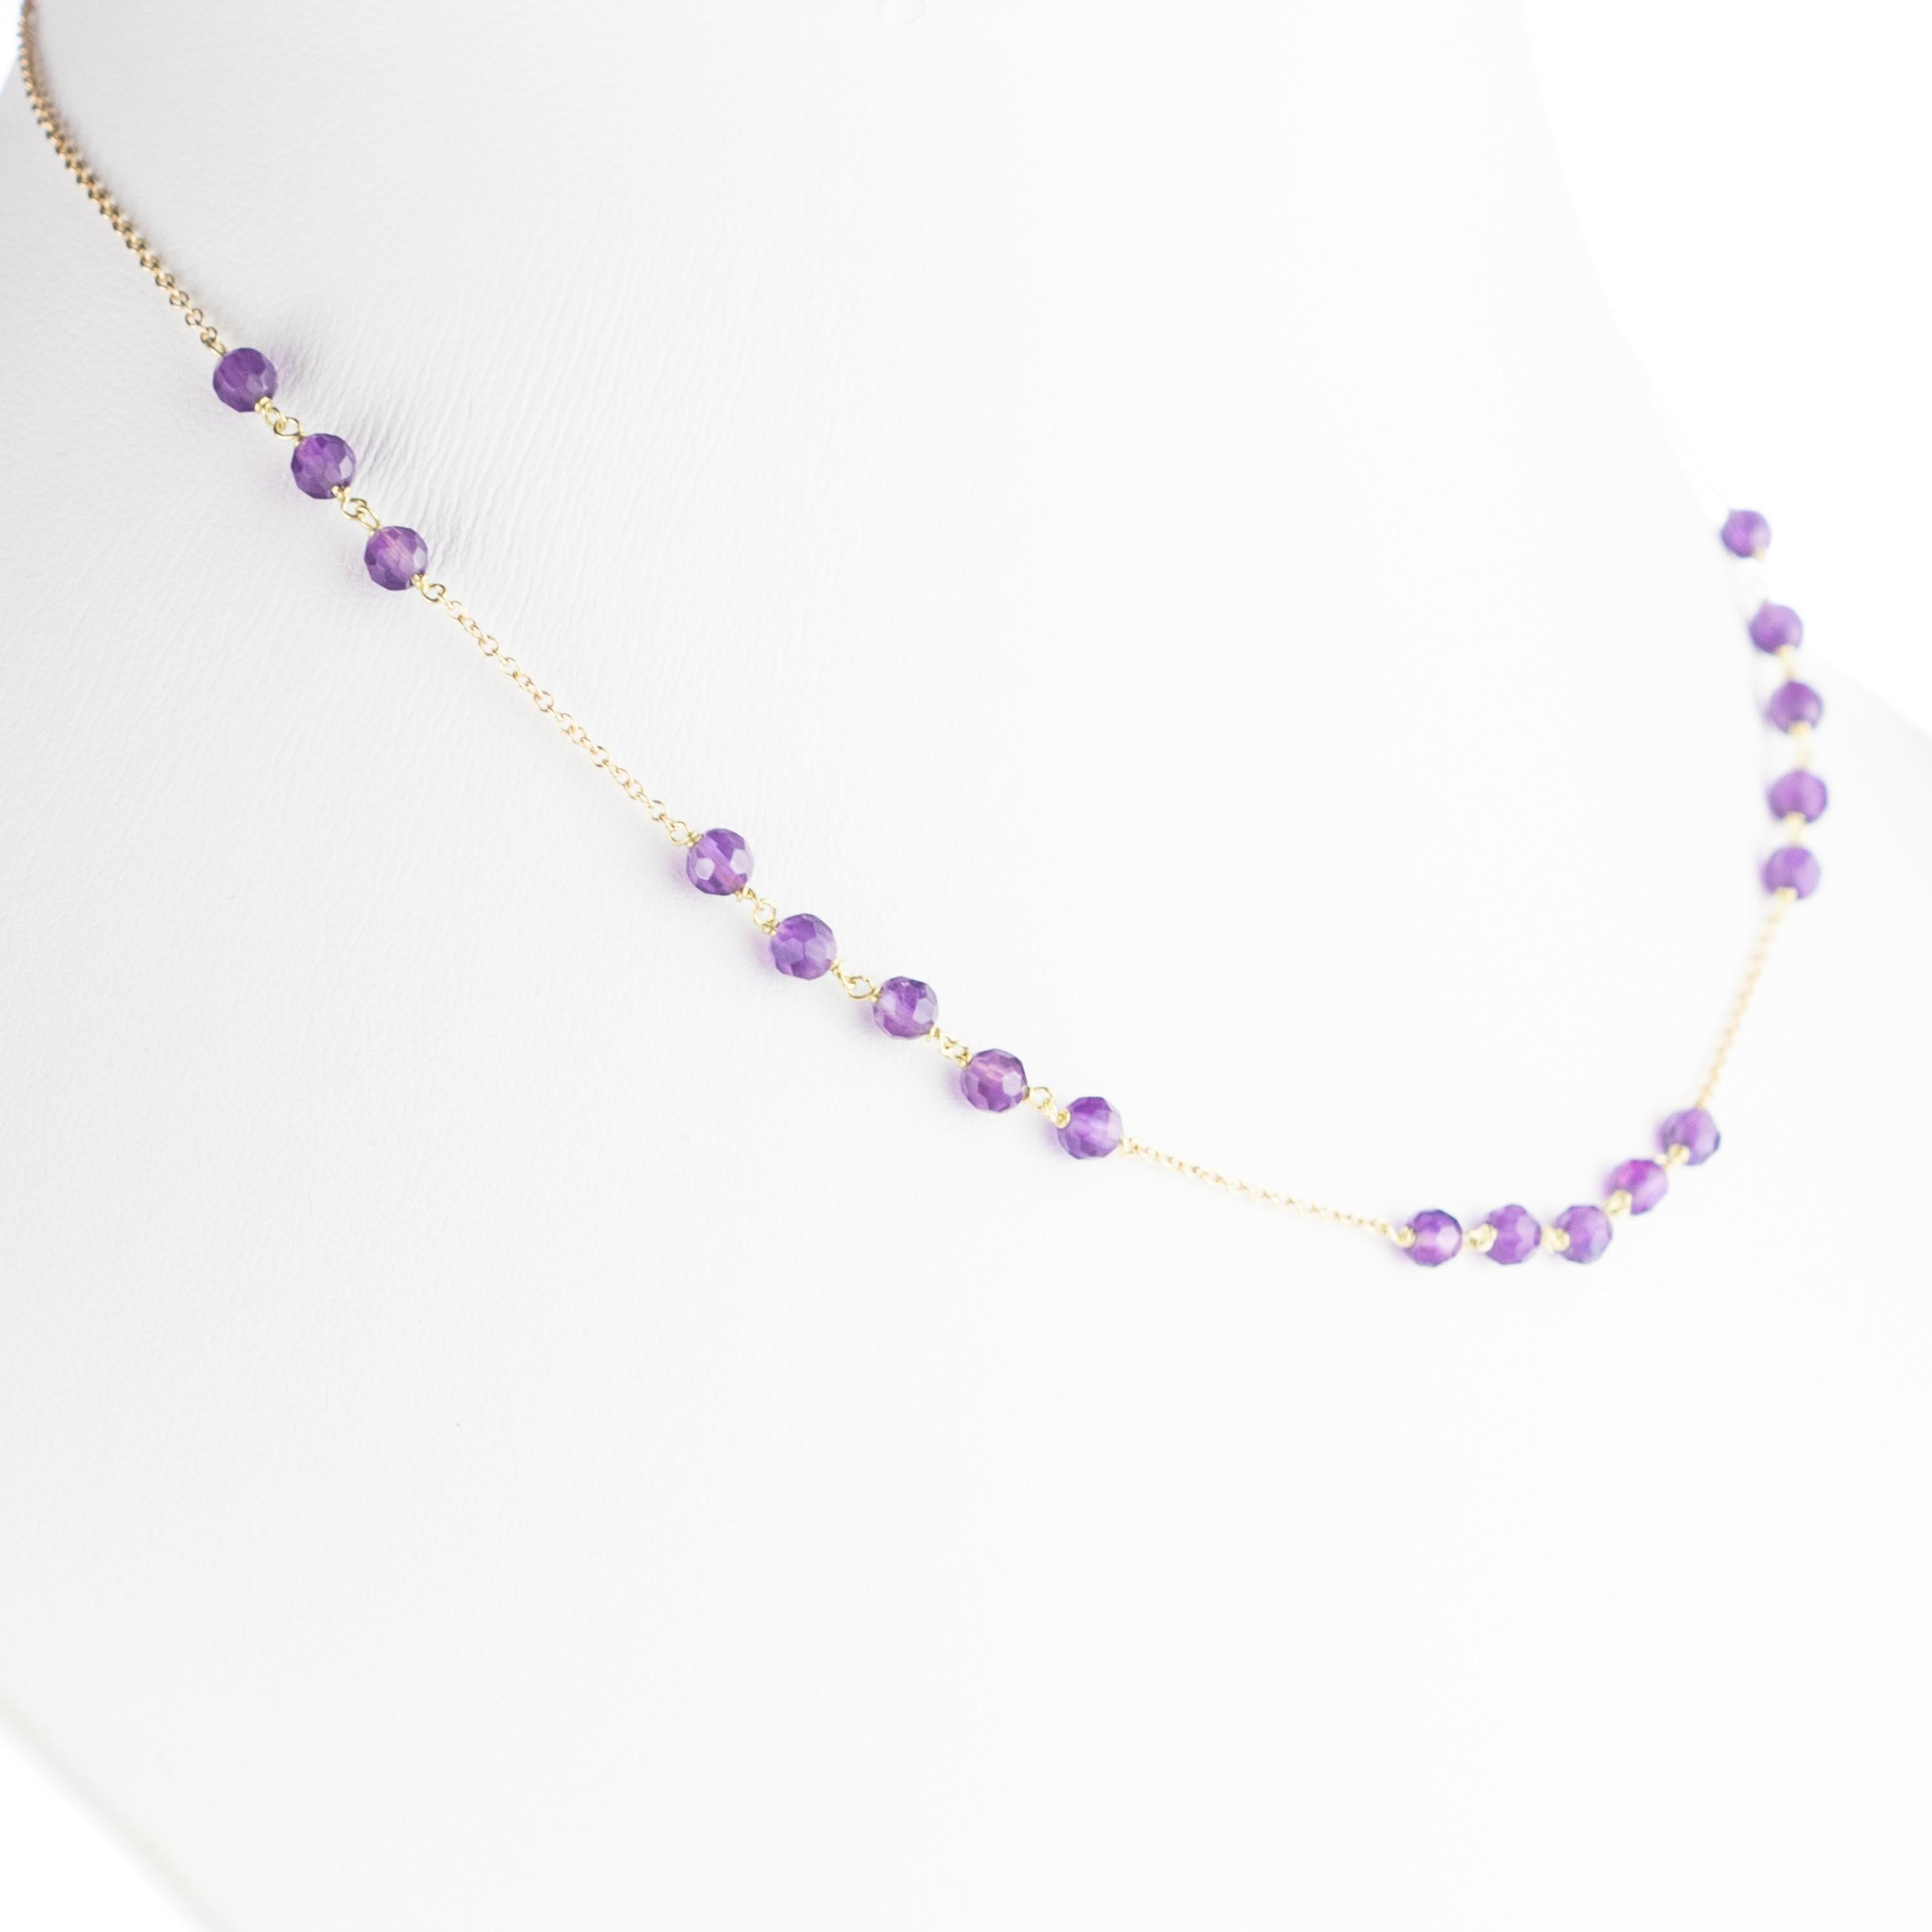 Marvellous necklace starring natural amethyst beads, for a bright charm of uniqueness. Luminous jewel with natural precious jewellery on elegant Gold Plate setting.

Amethyst is marked as the stone for the month of February. Amethyst is the stone of